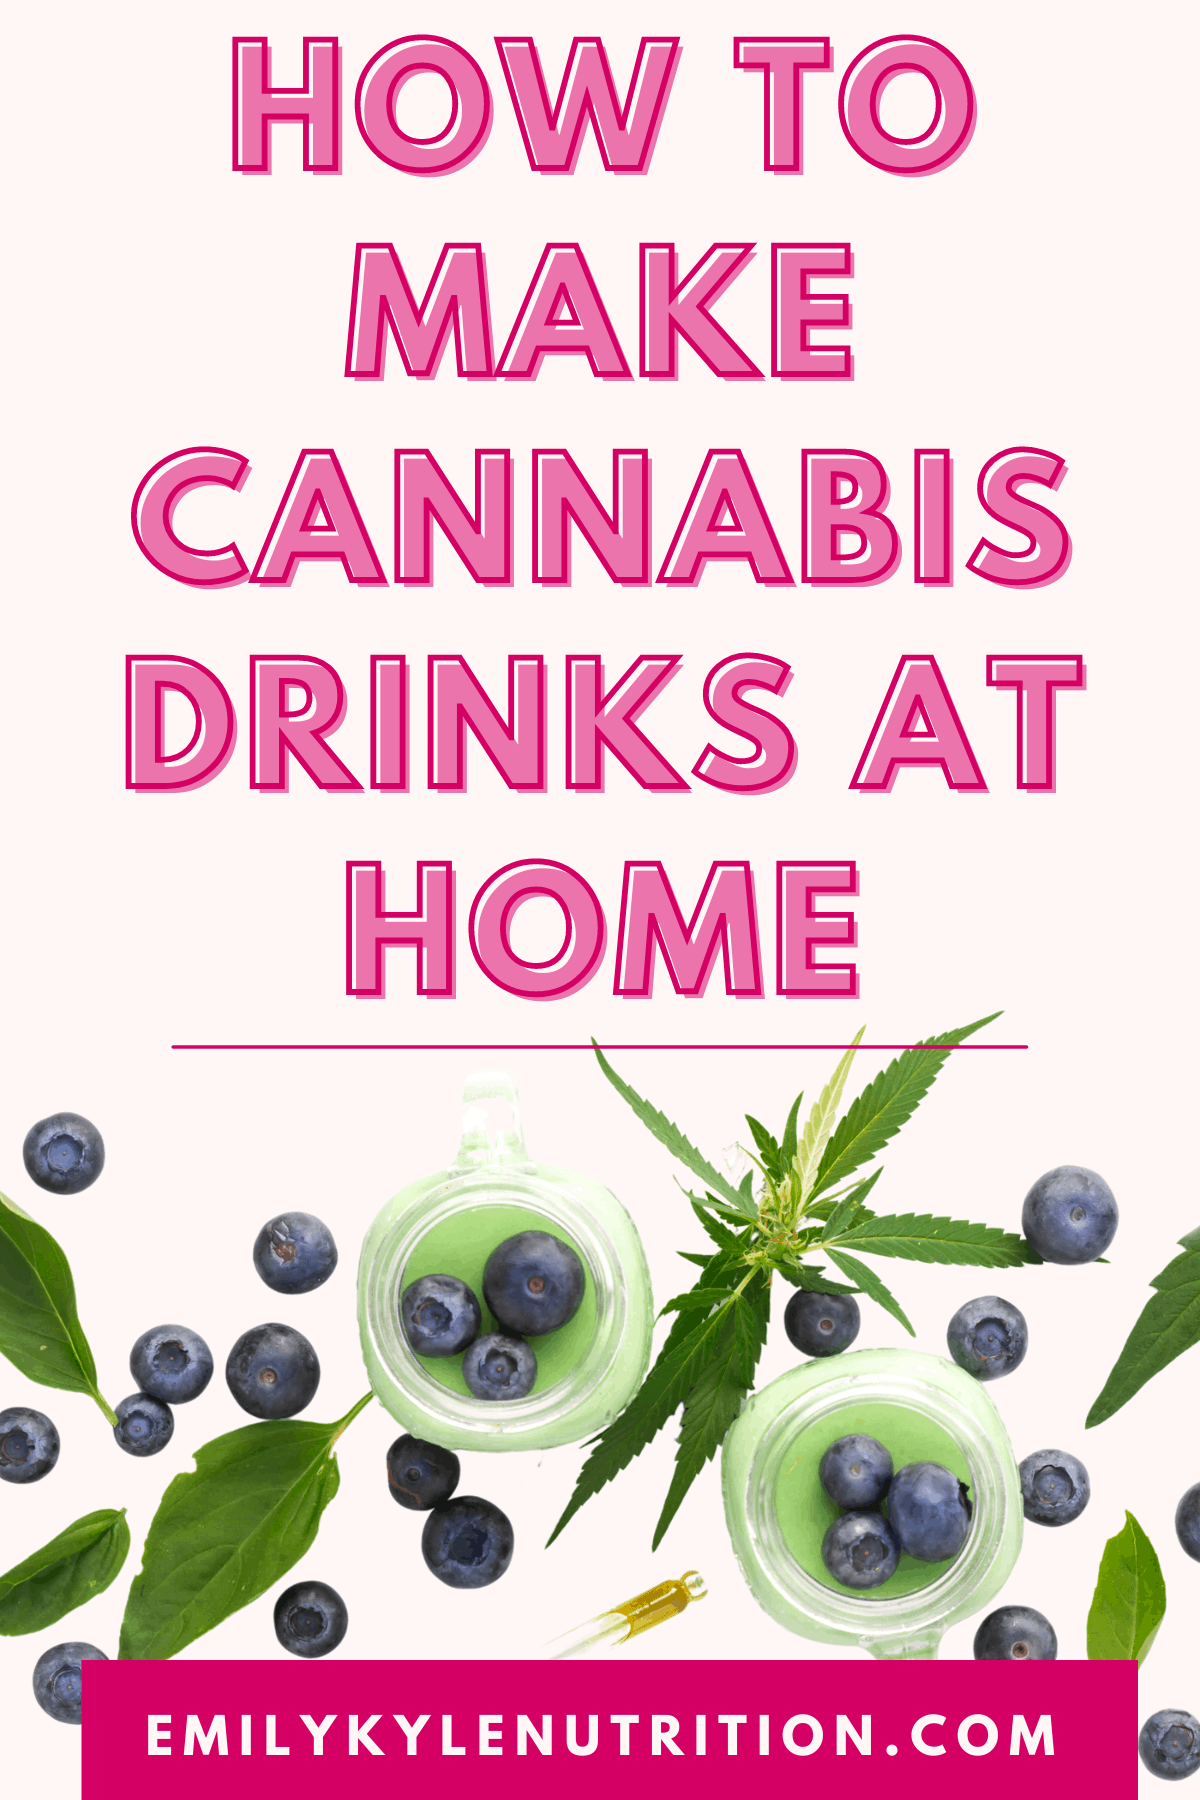 How to Make Cannabis Drinks At Home